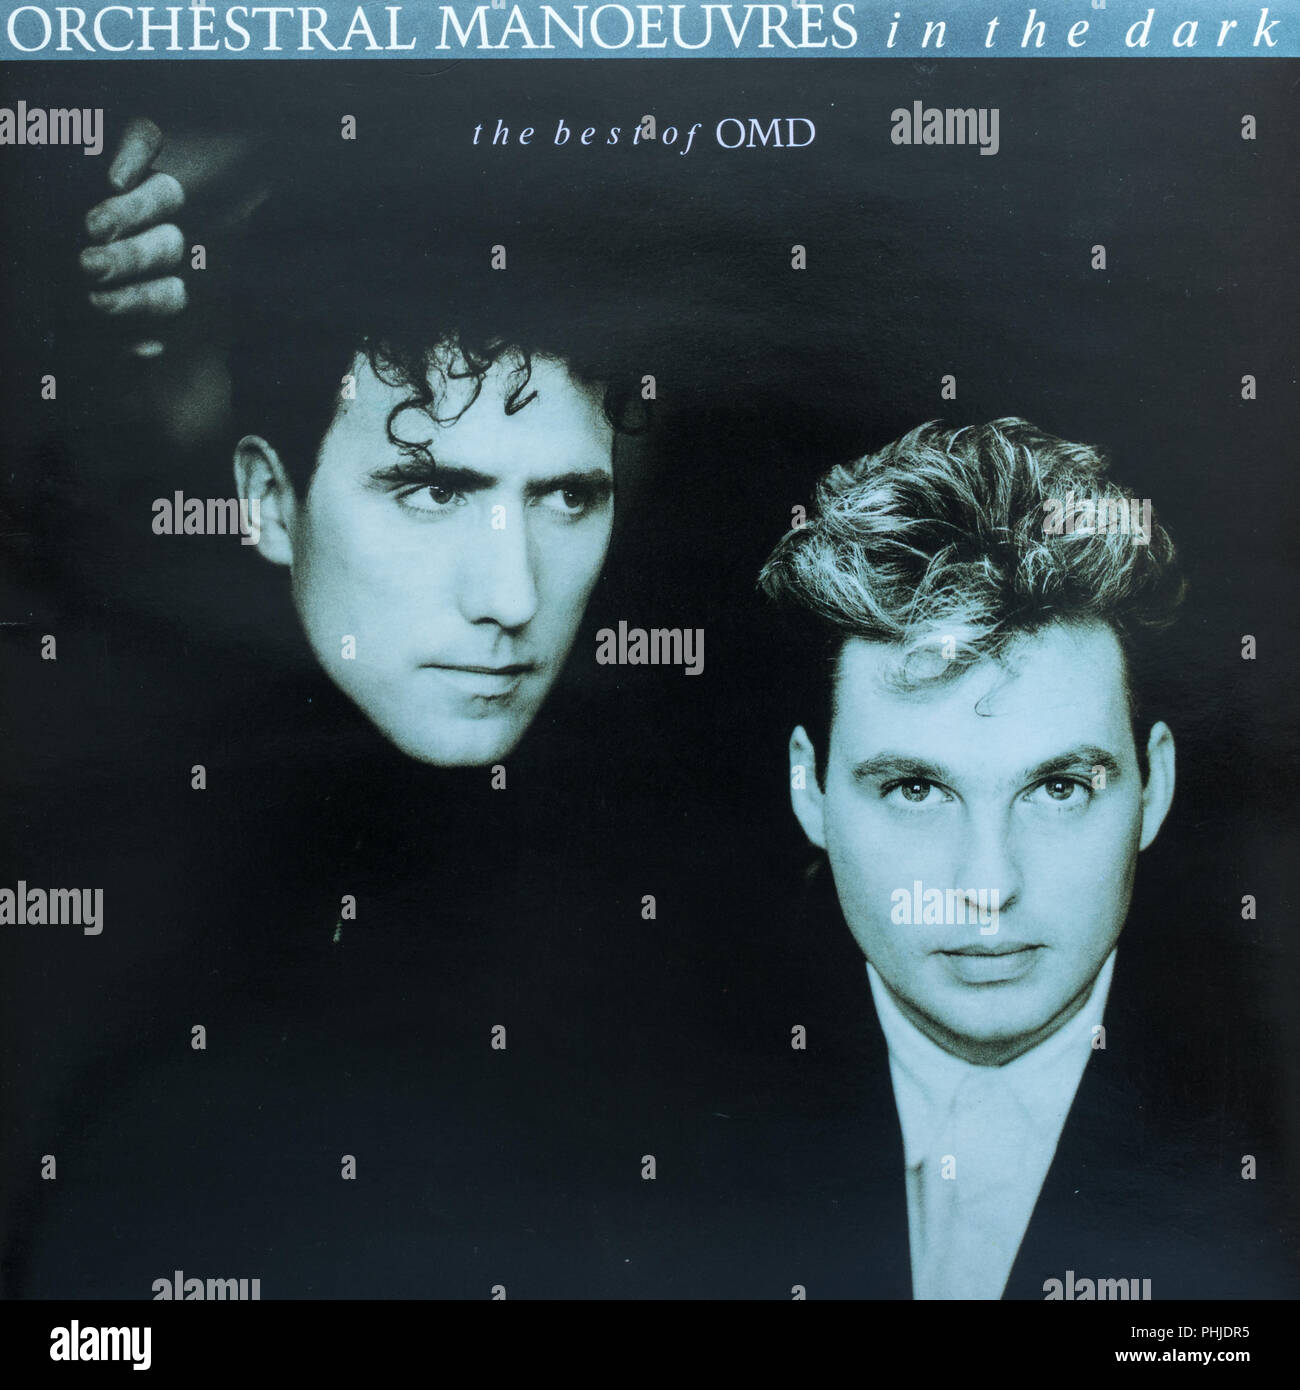 Orchestral manoeuvres in the dark - The best of OMD - album cover Stock Photo